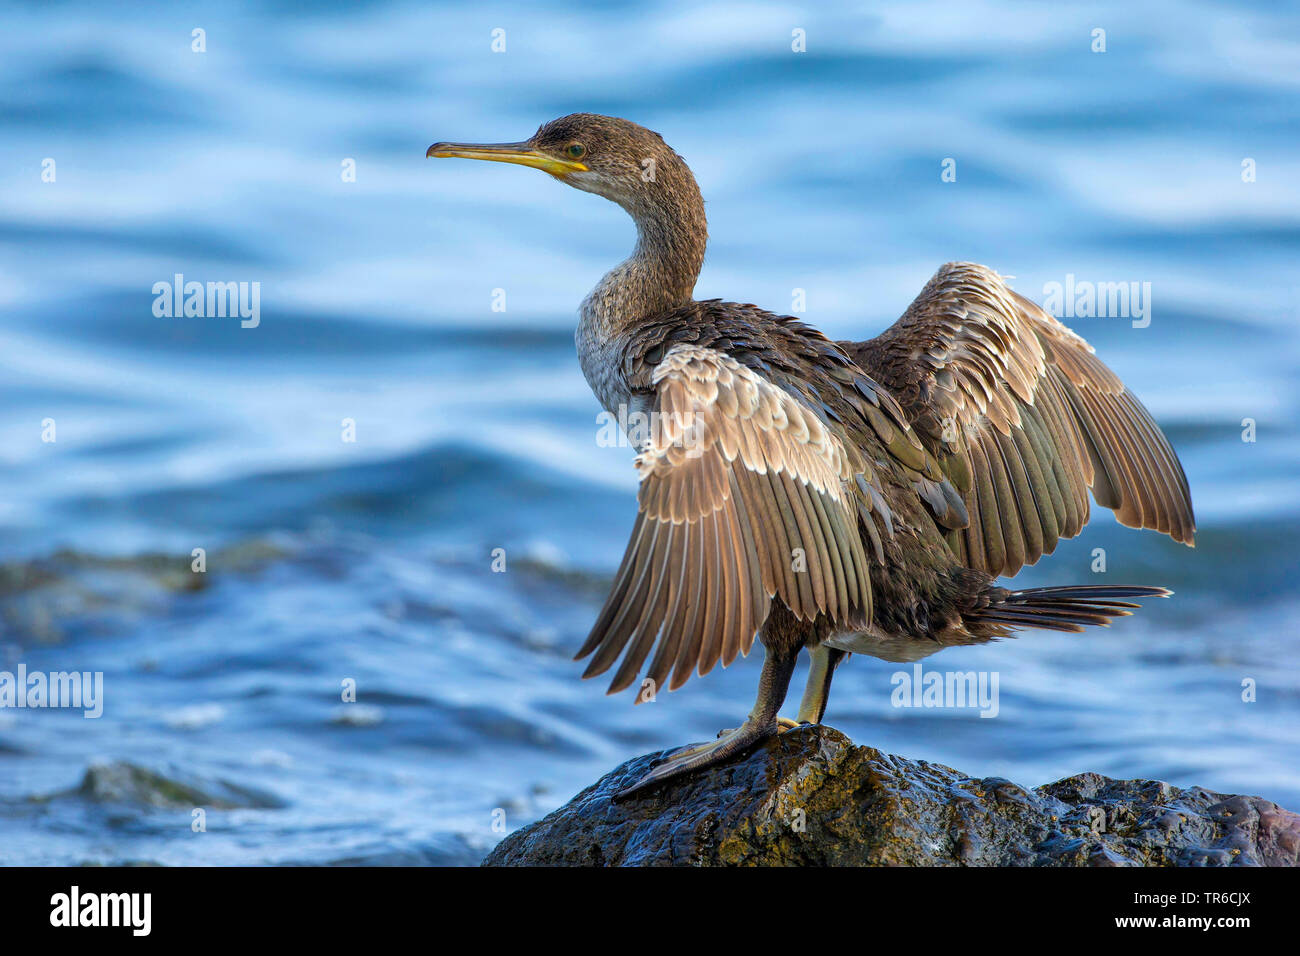 shag (Phalacrocorax aristotelis), young bird with outstretched wings on a rock at the coast, Spain, Balearen, Majorca Stock Photo